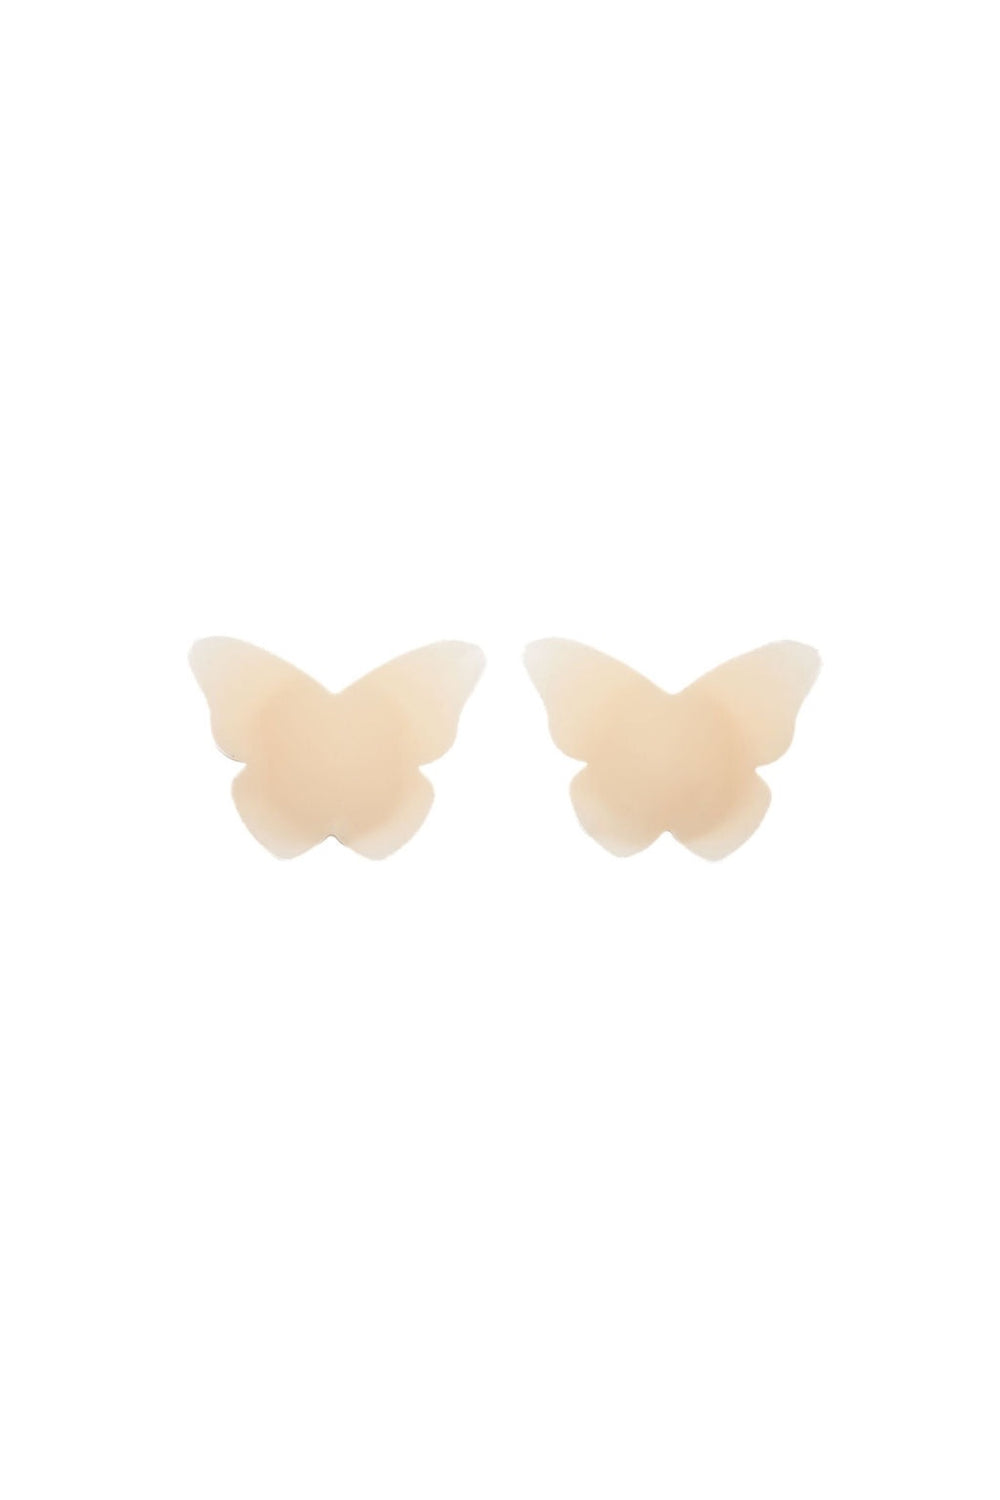 Nude I Butterfly Nipple Covers